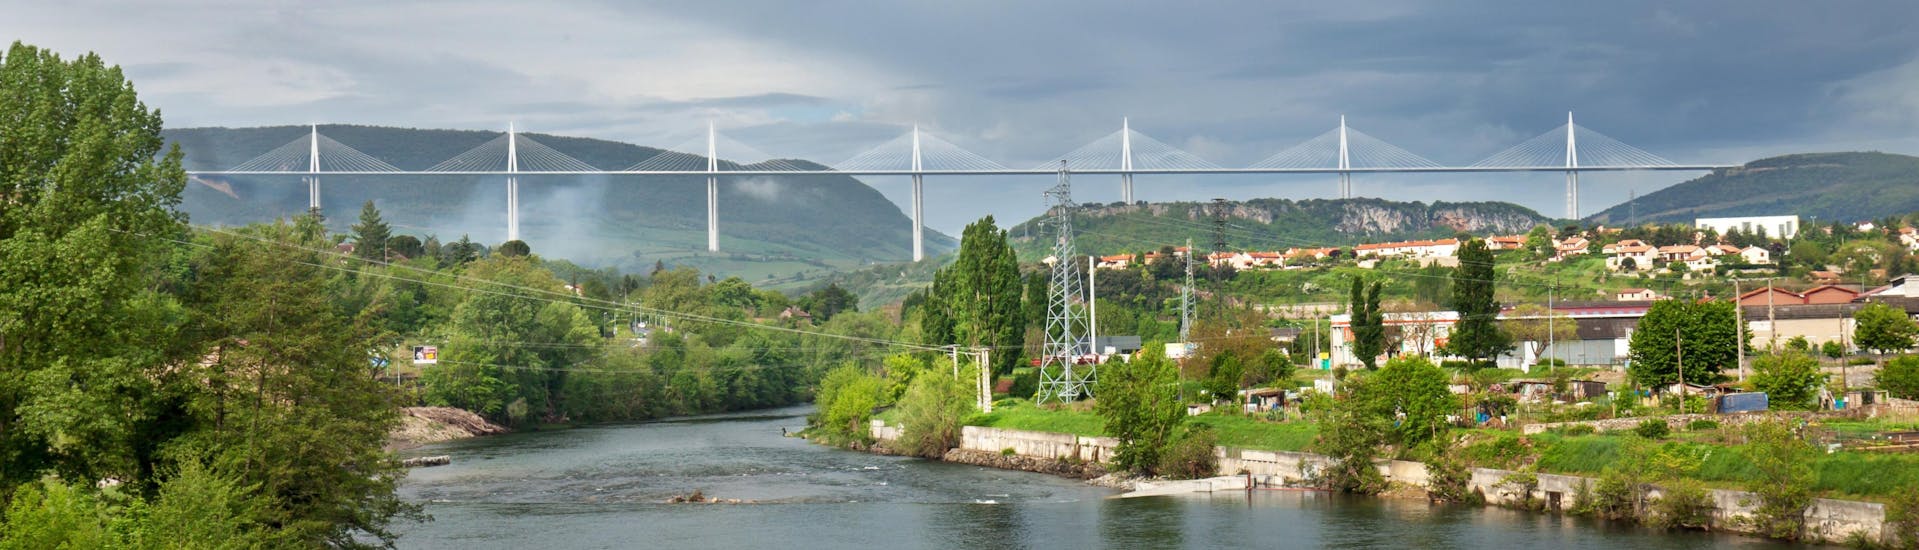 View of the Millau bridge under which flows the Tarn river, a popular destination to do canoeing.